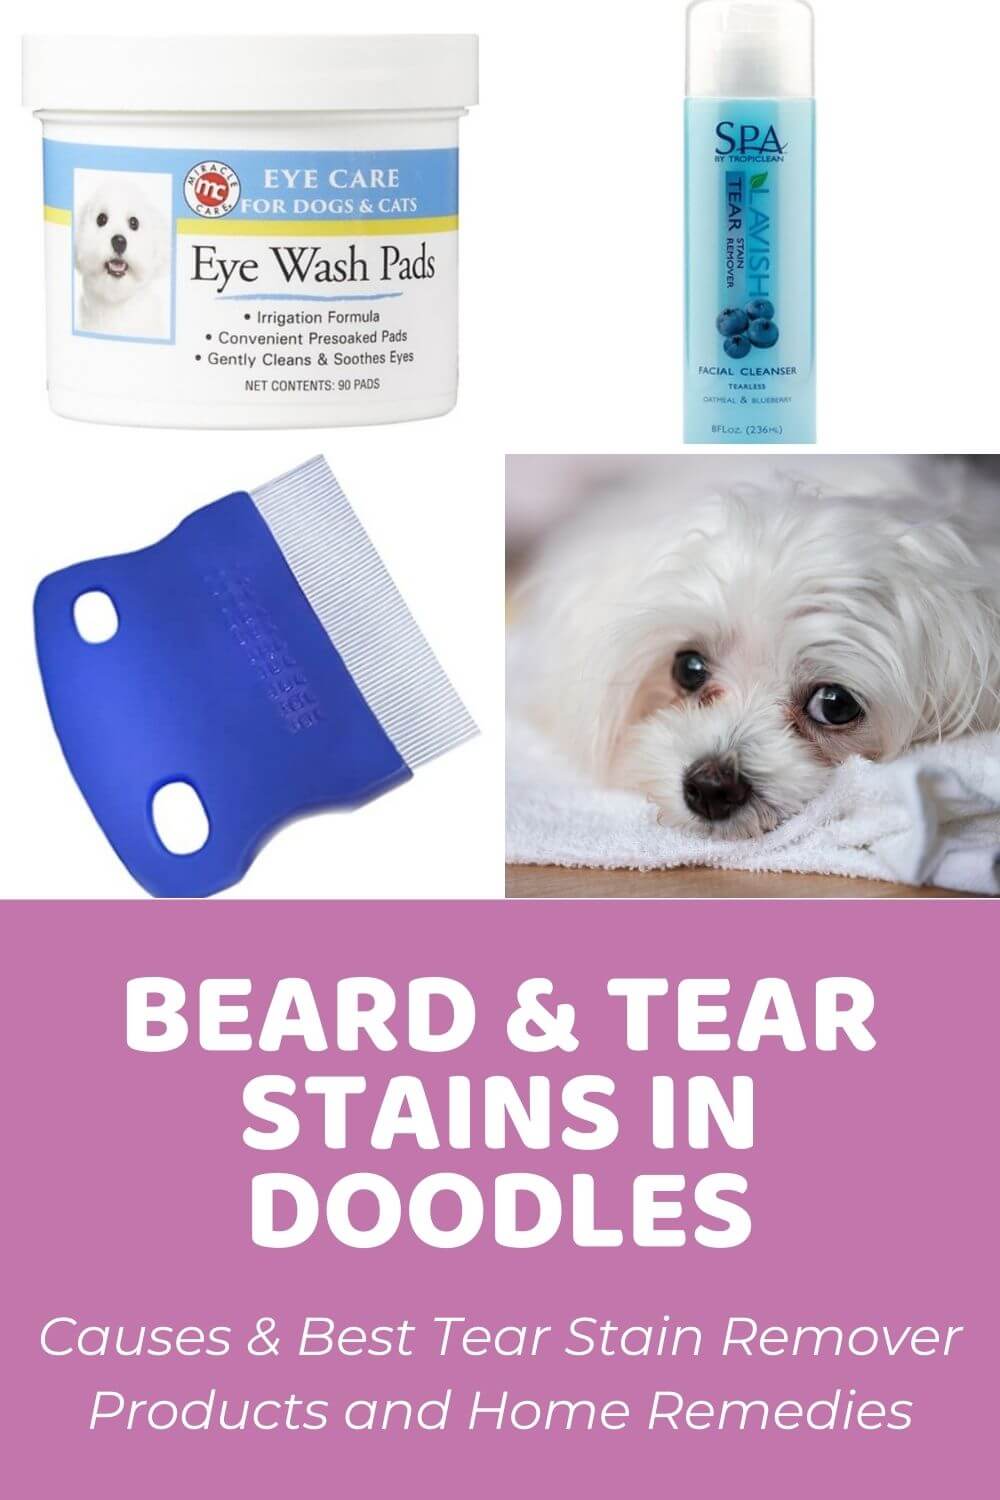 Tear Stain Remover: Best Products for Beard & Tear Stains in Doodles